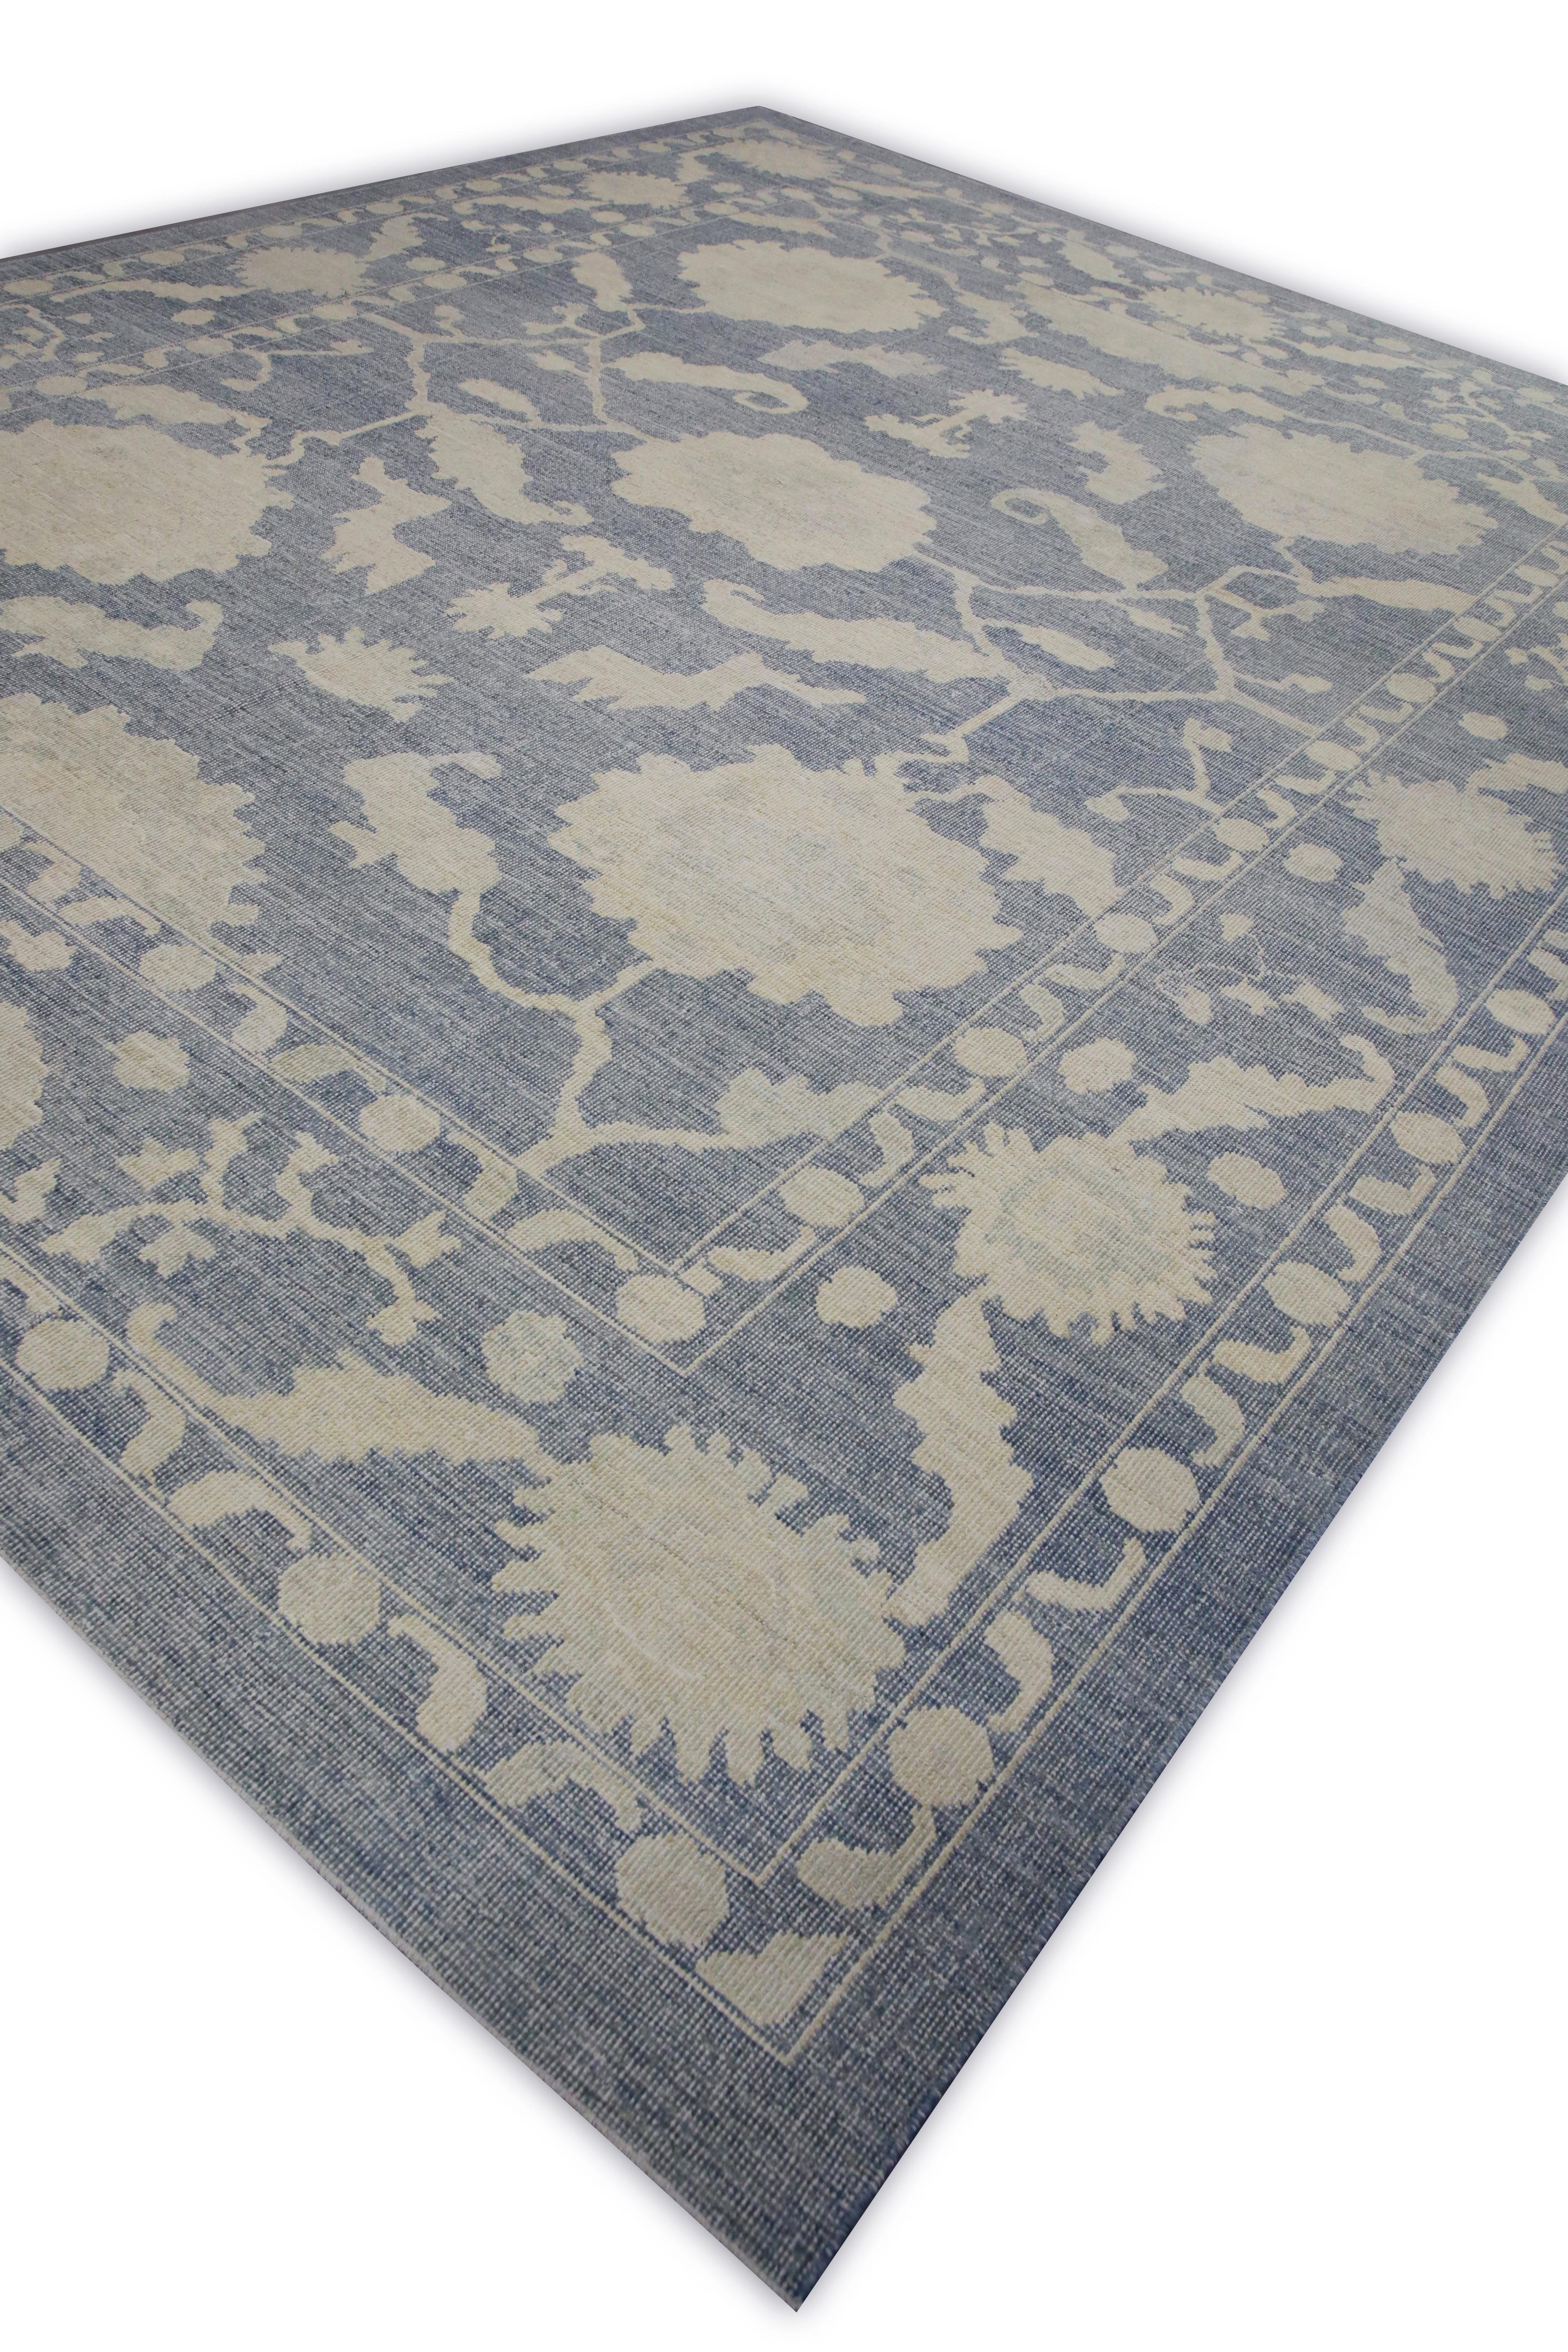 Contemporary Blue Floral Design Handwoven Wool Turkish Oushak Rug 12'3